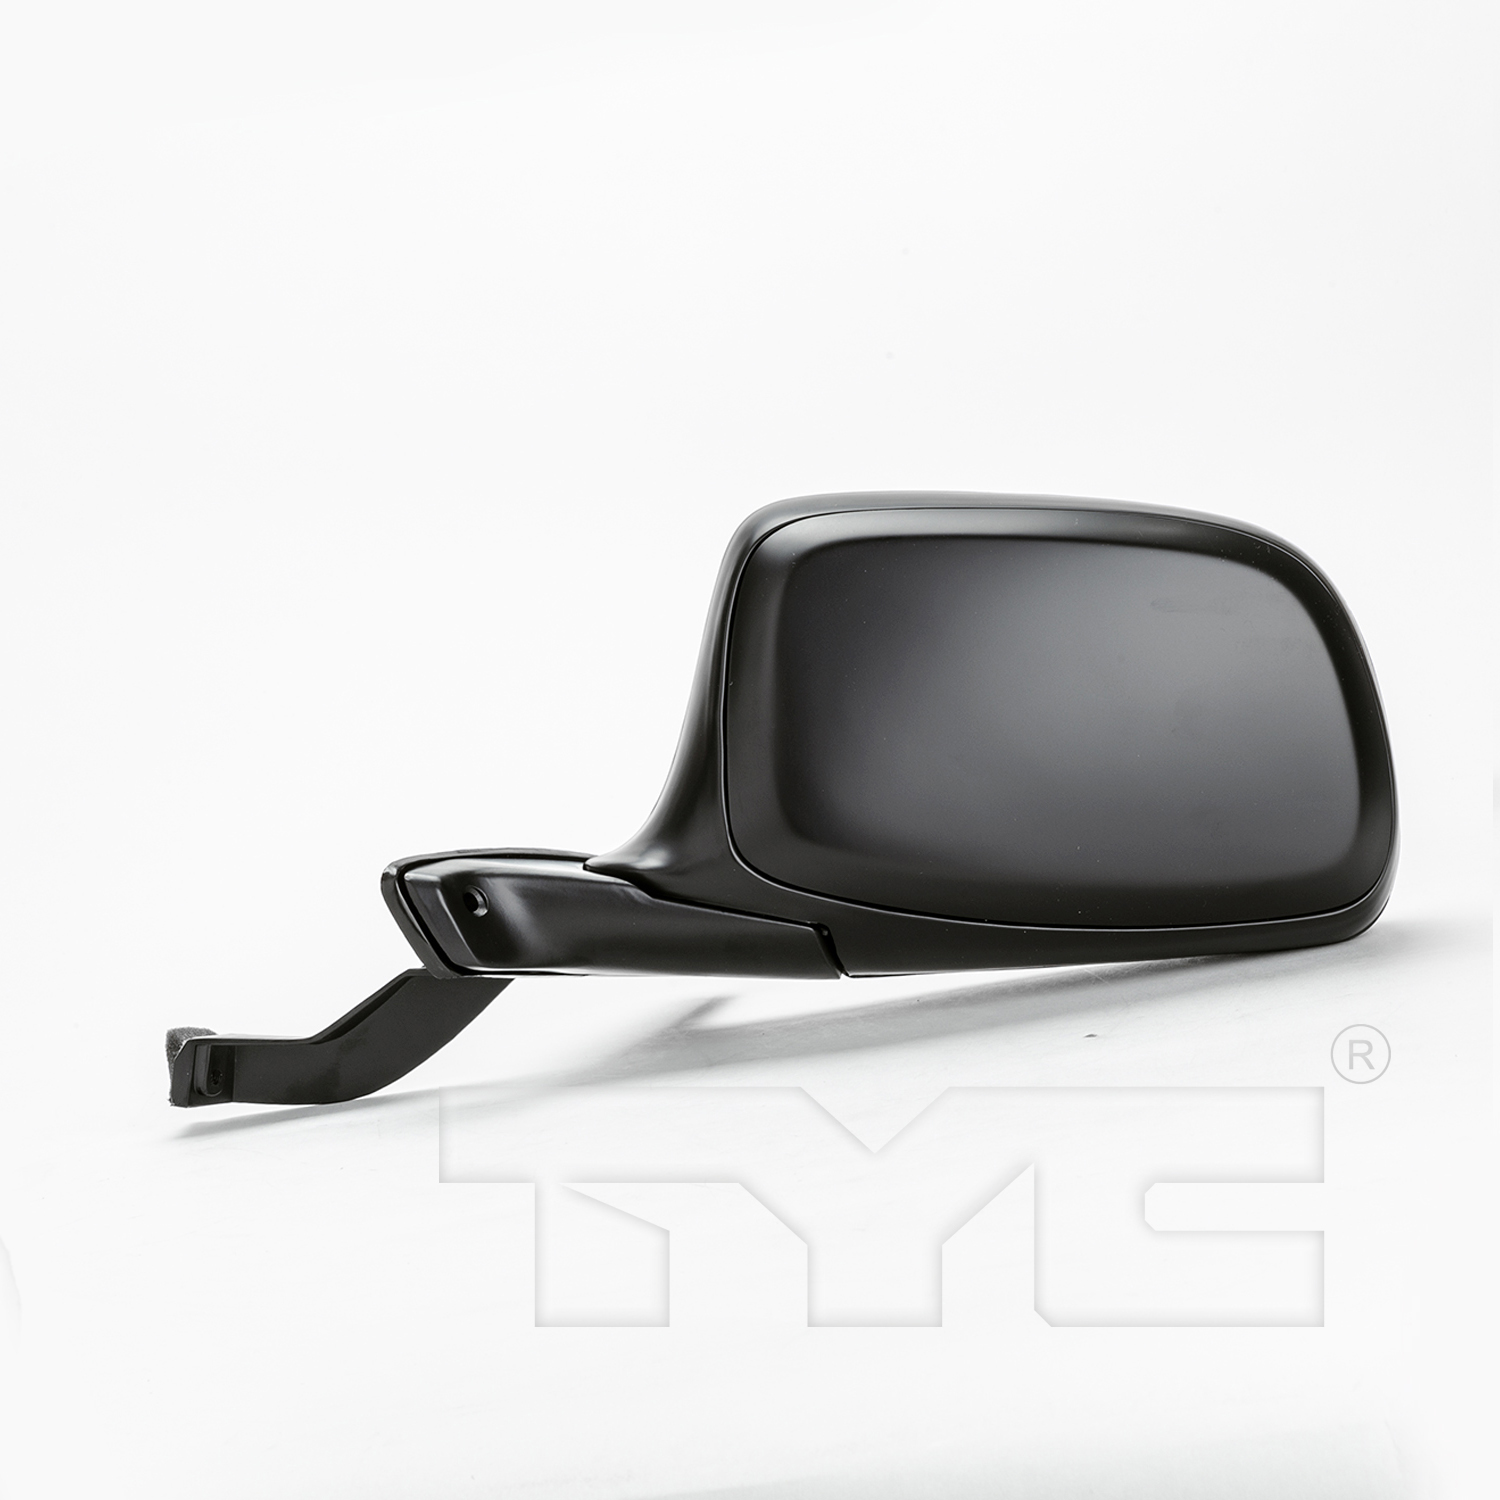 Aftermarket MIRRORS for FORD - BRONCO, BRONCO,92-96,LT Mirror outside rear view